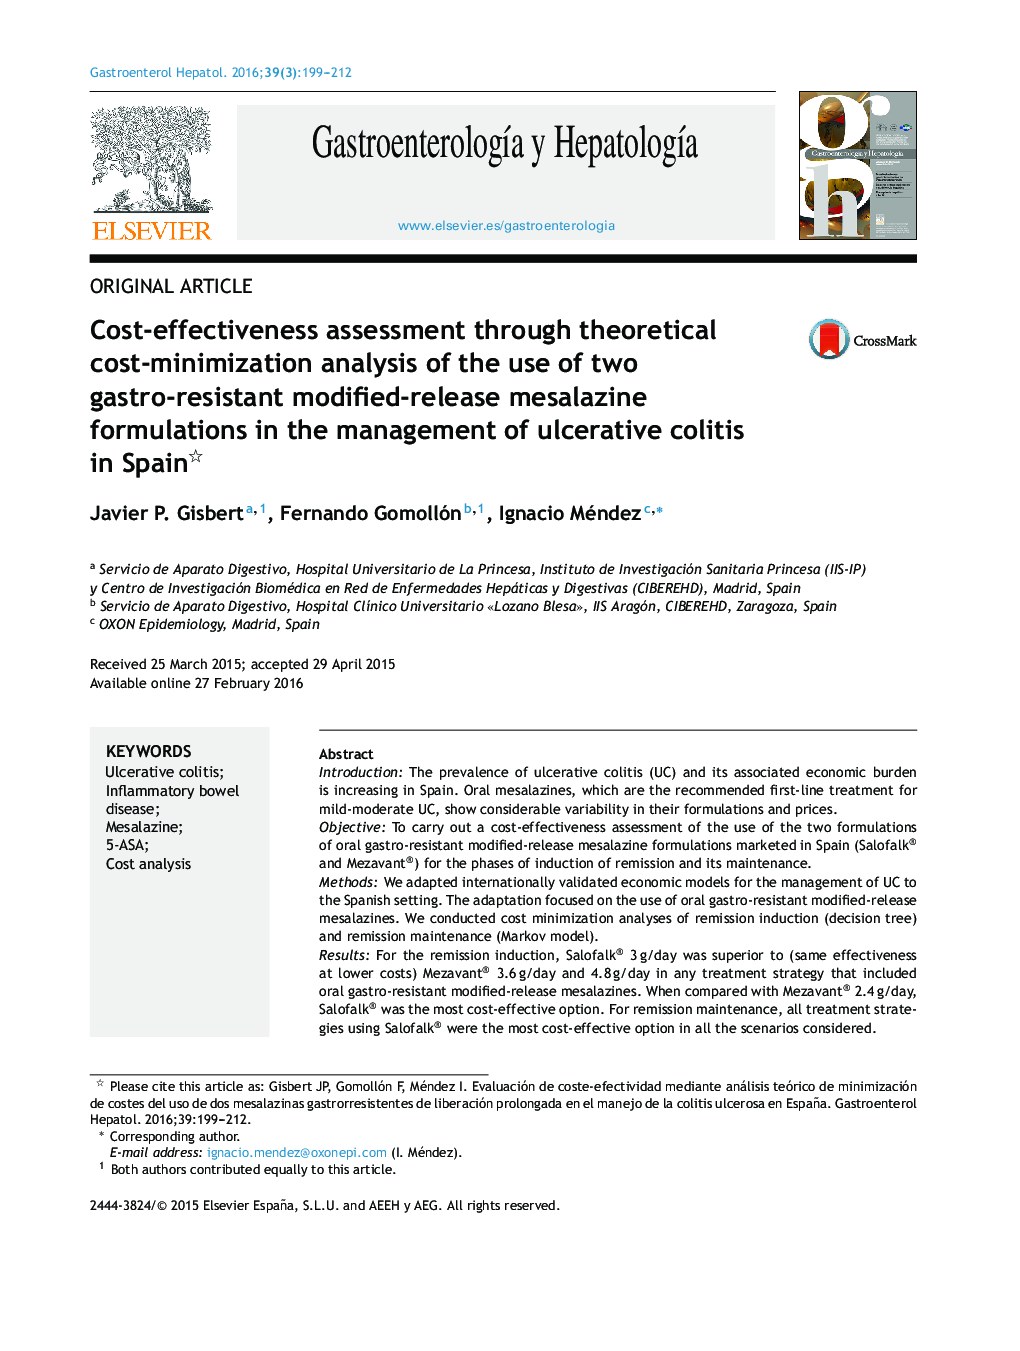 Cost-effectiveness assessment through theoretical cost-minimization analysis of the use of two gastro-resistant modified-release mesalazine formulations in the management of ulcerative colitis in Spain 